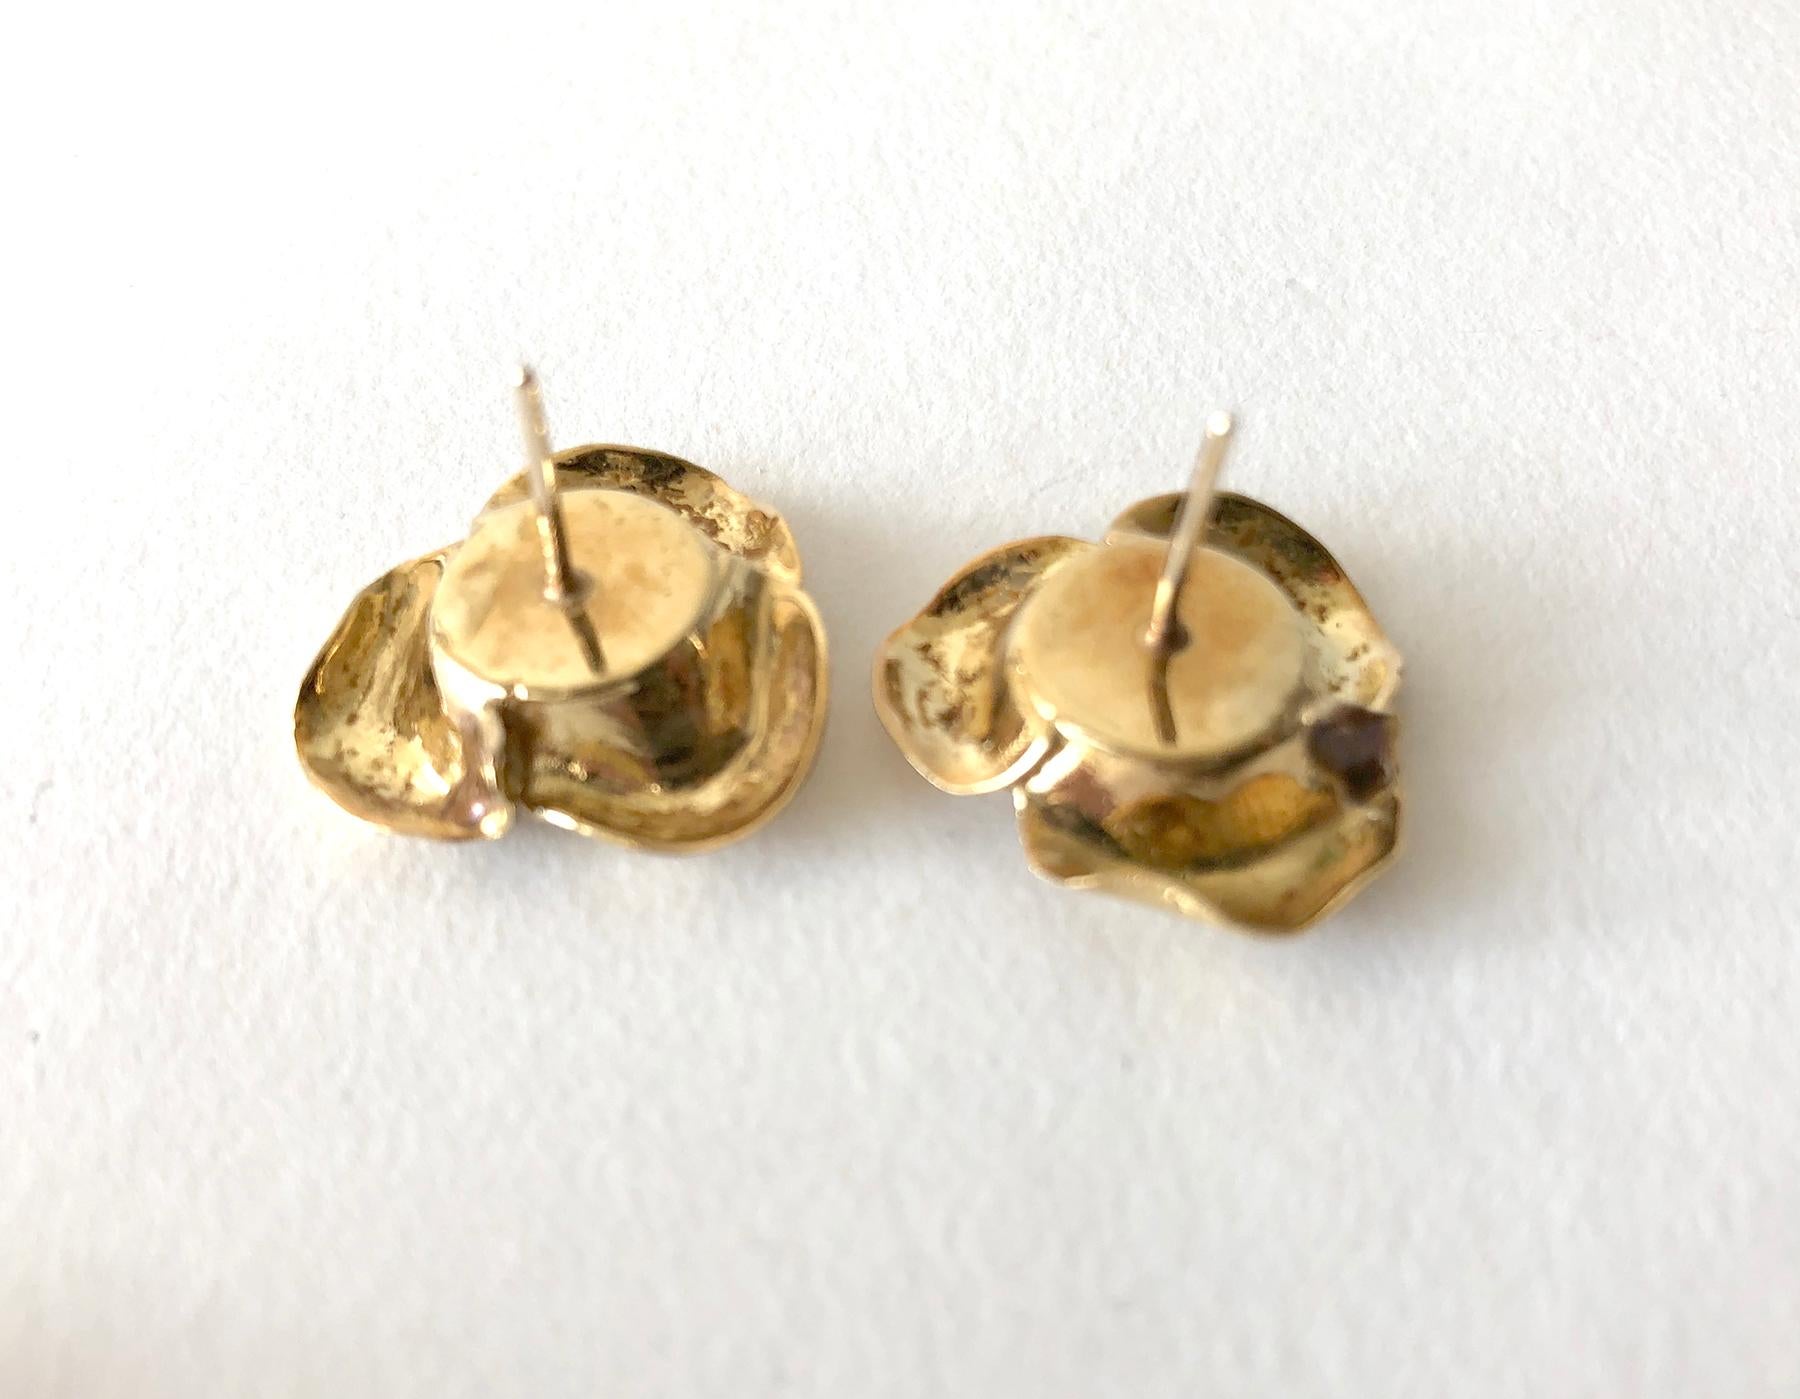 Cartier France 18K Gold Diamond Rose Flowering Brooch and Earrings Set In Good Condition For Sale In Palm Springs, CA